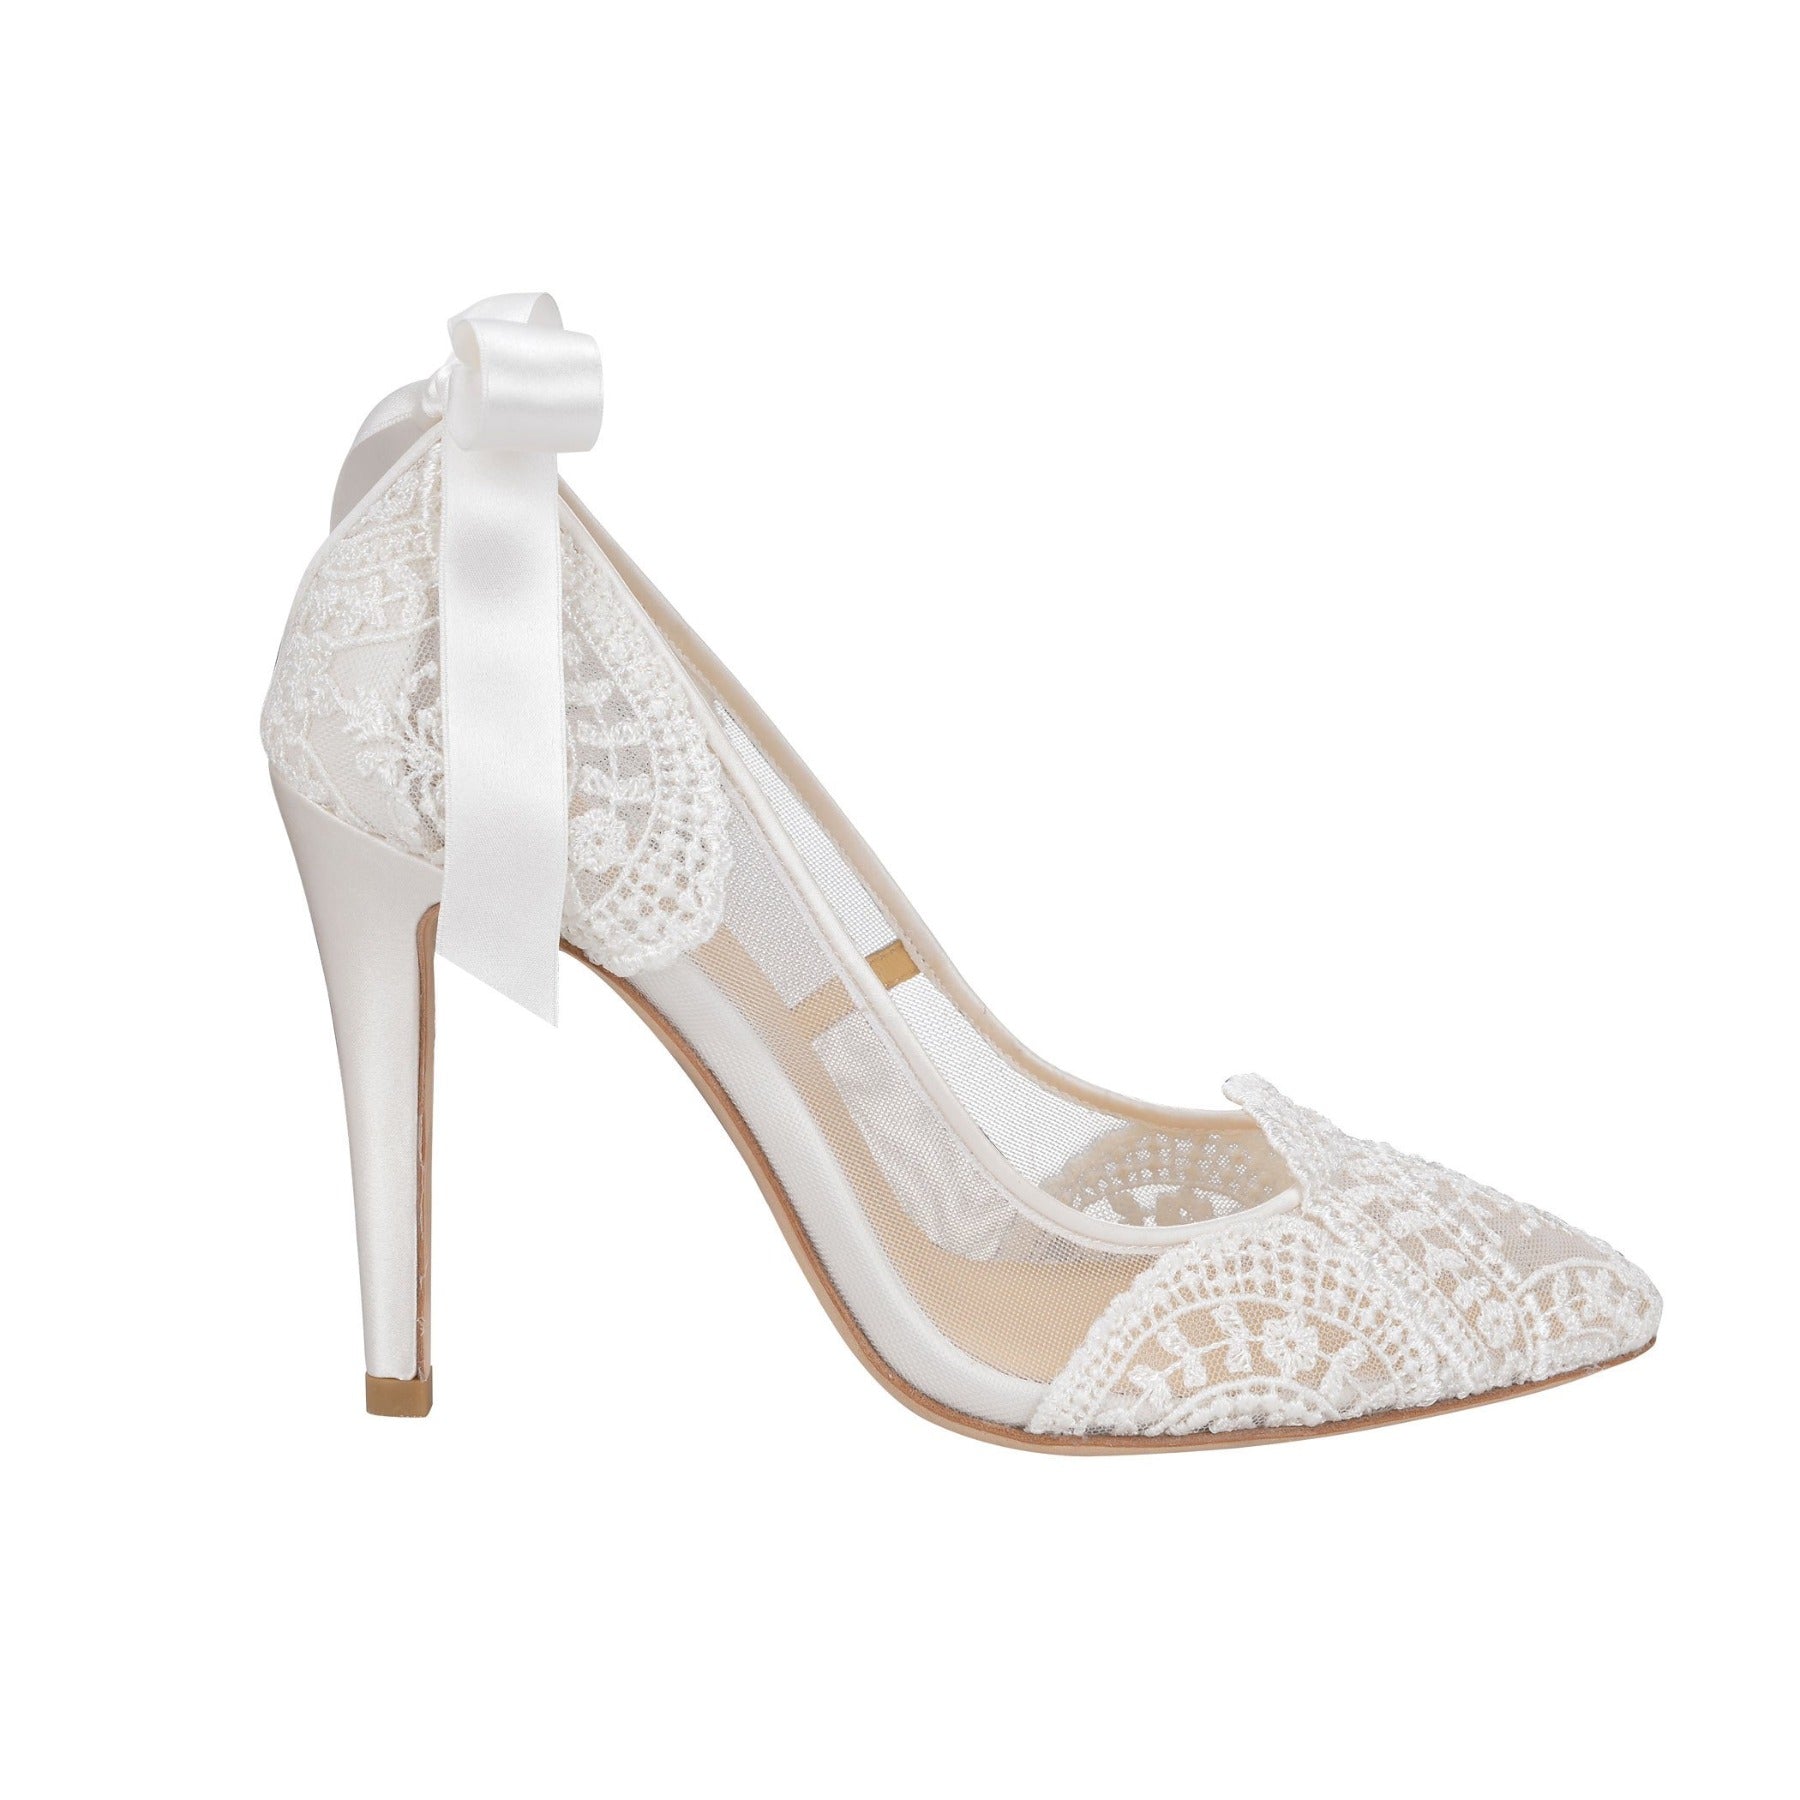 Giselle Embroidered Bridal Shoes | Ivory Lace Wedding Shoes